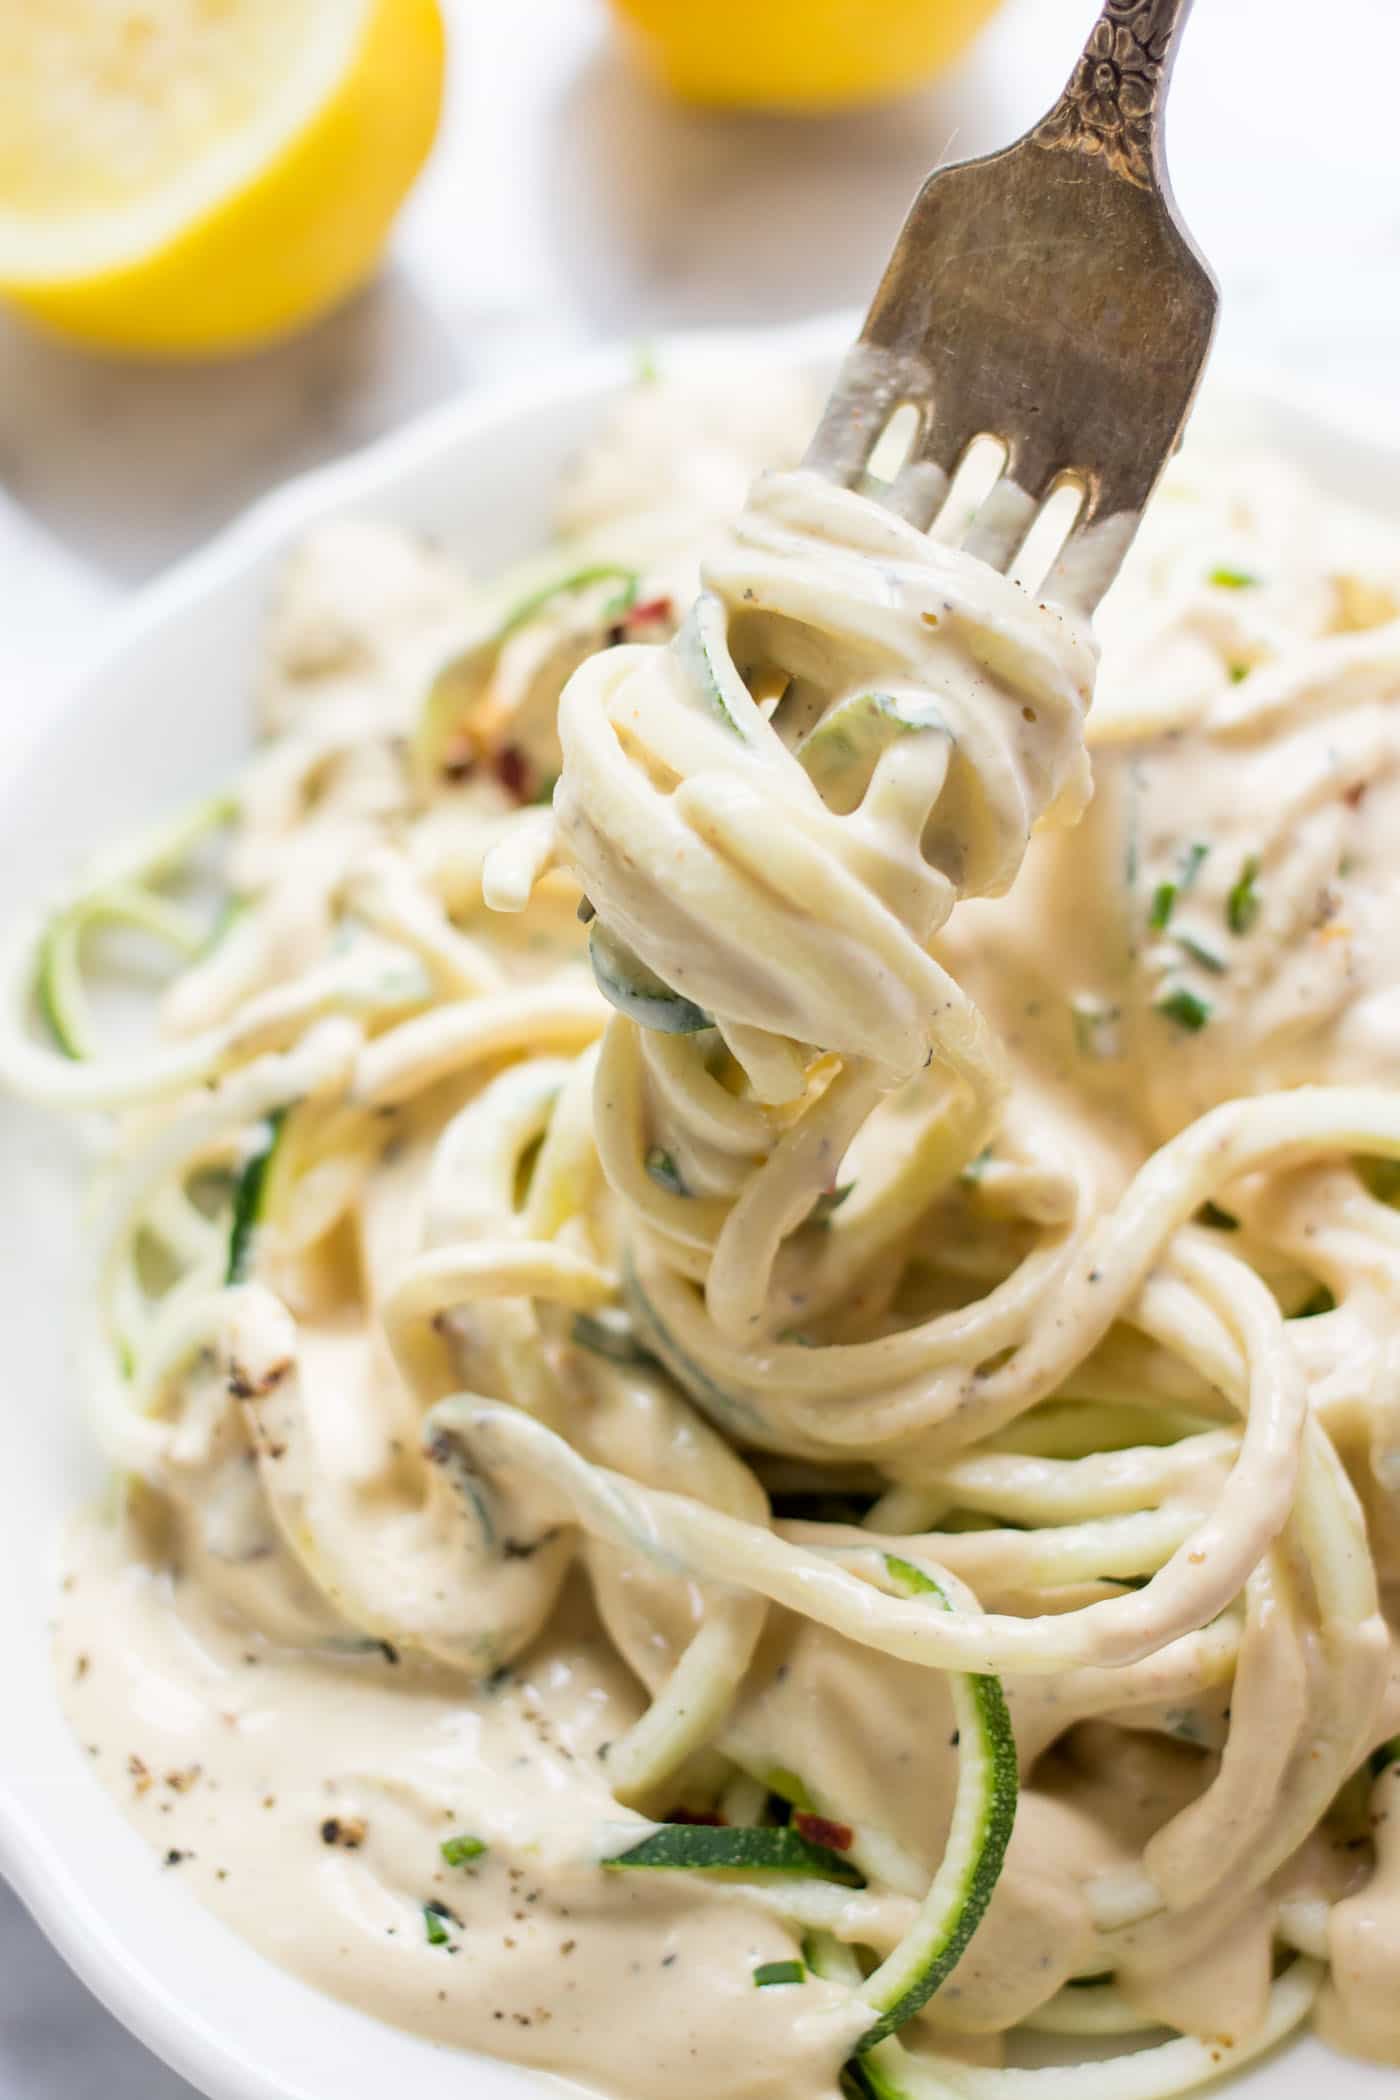 VEGAN LEMON CREAM SAUCE on top of spiralized zucchini noodles! A light and healthy dish that is burst with plant-based protein!